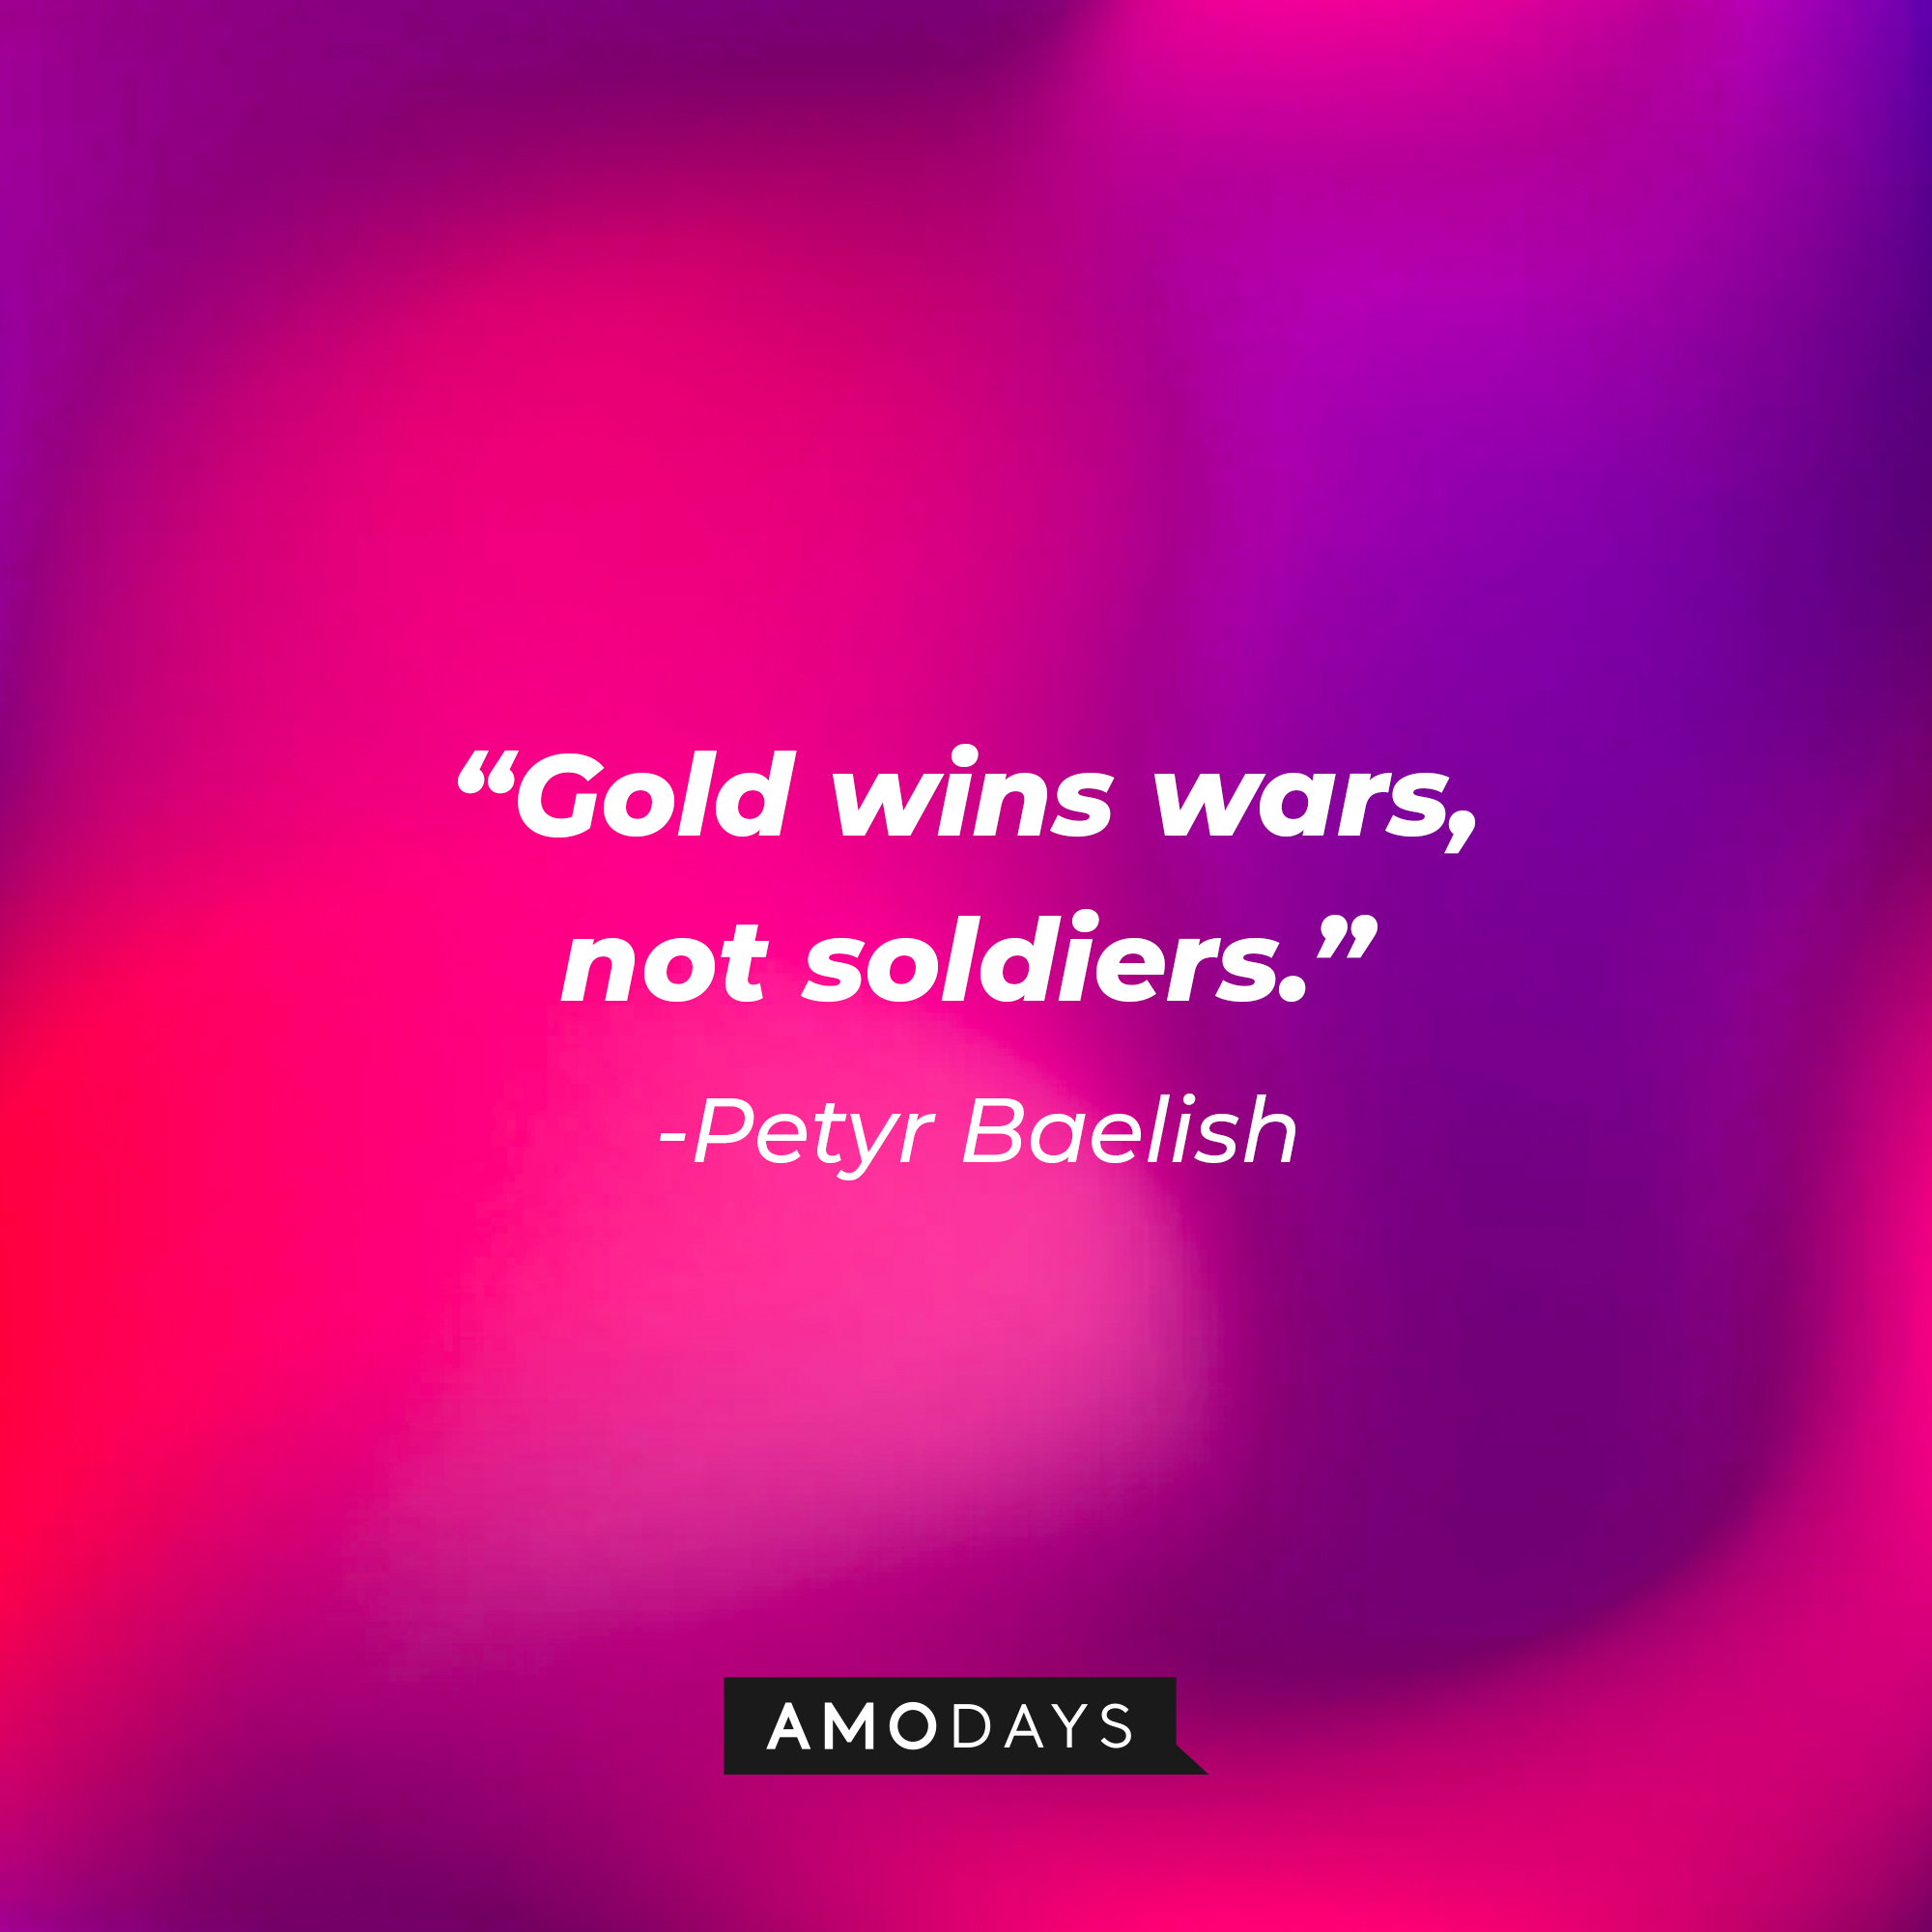 Petyr Baelish’s quote: “Gold wins wars, not soldiers.”  | Source: AmoDays